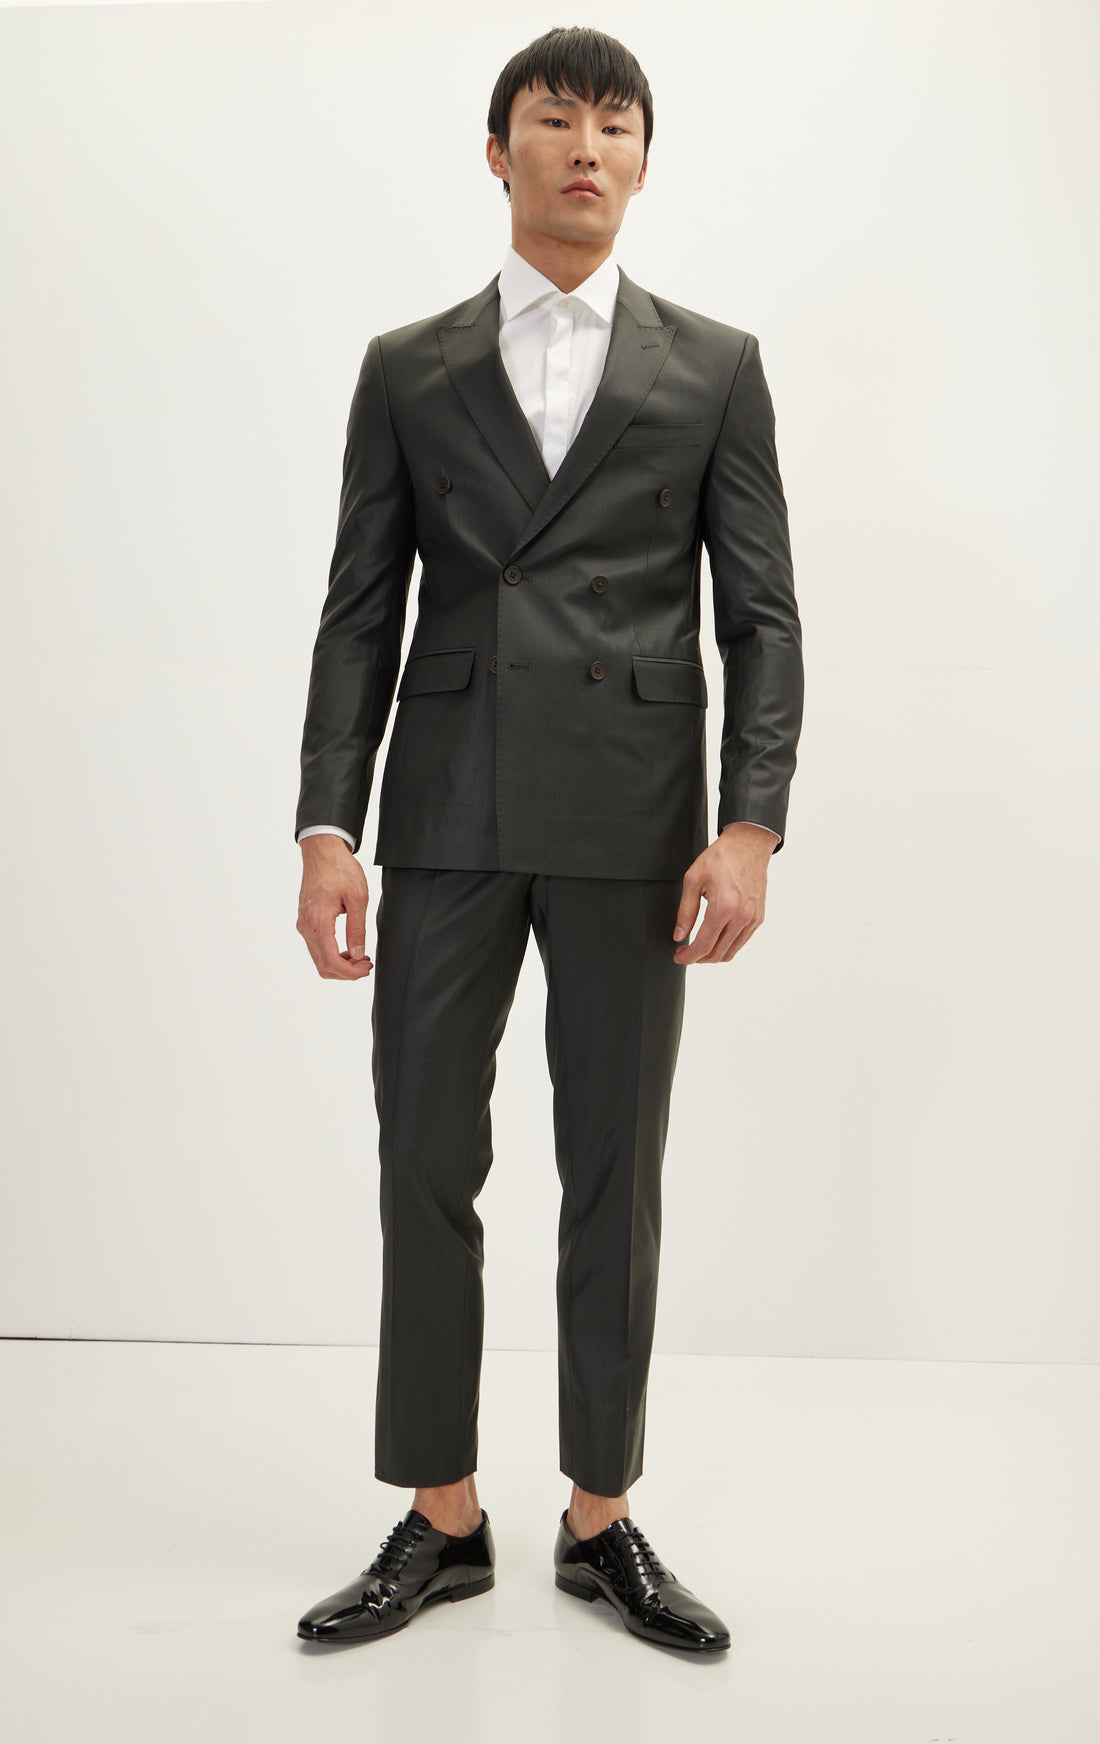 N° R280 MERINO WOOL DOUBLE BREASTED SUIT - CHARCOAL